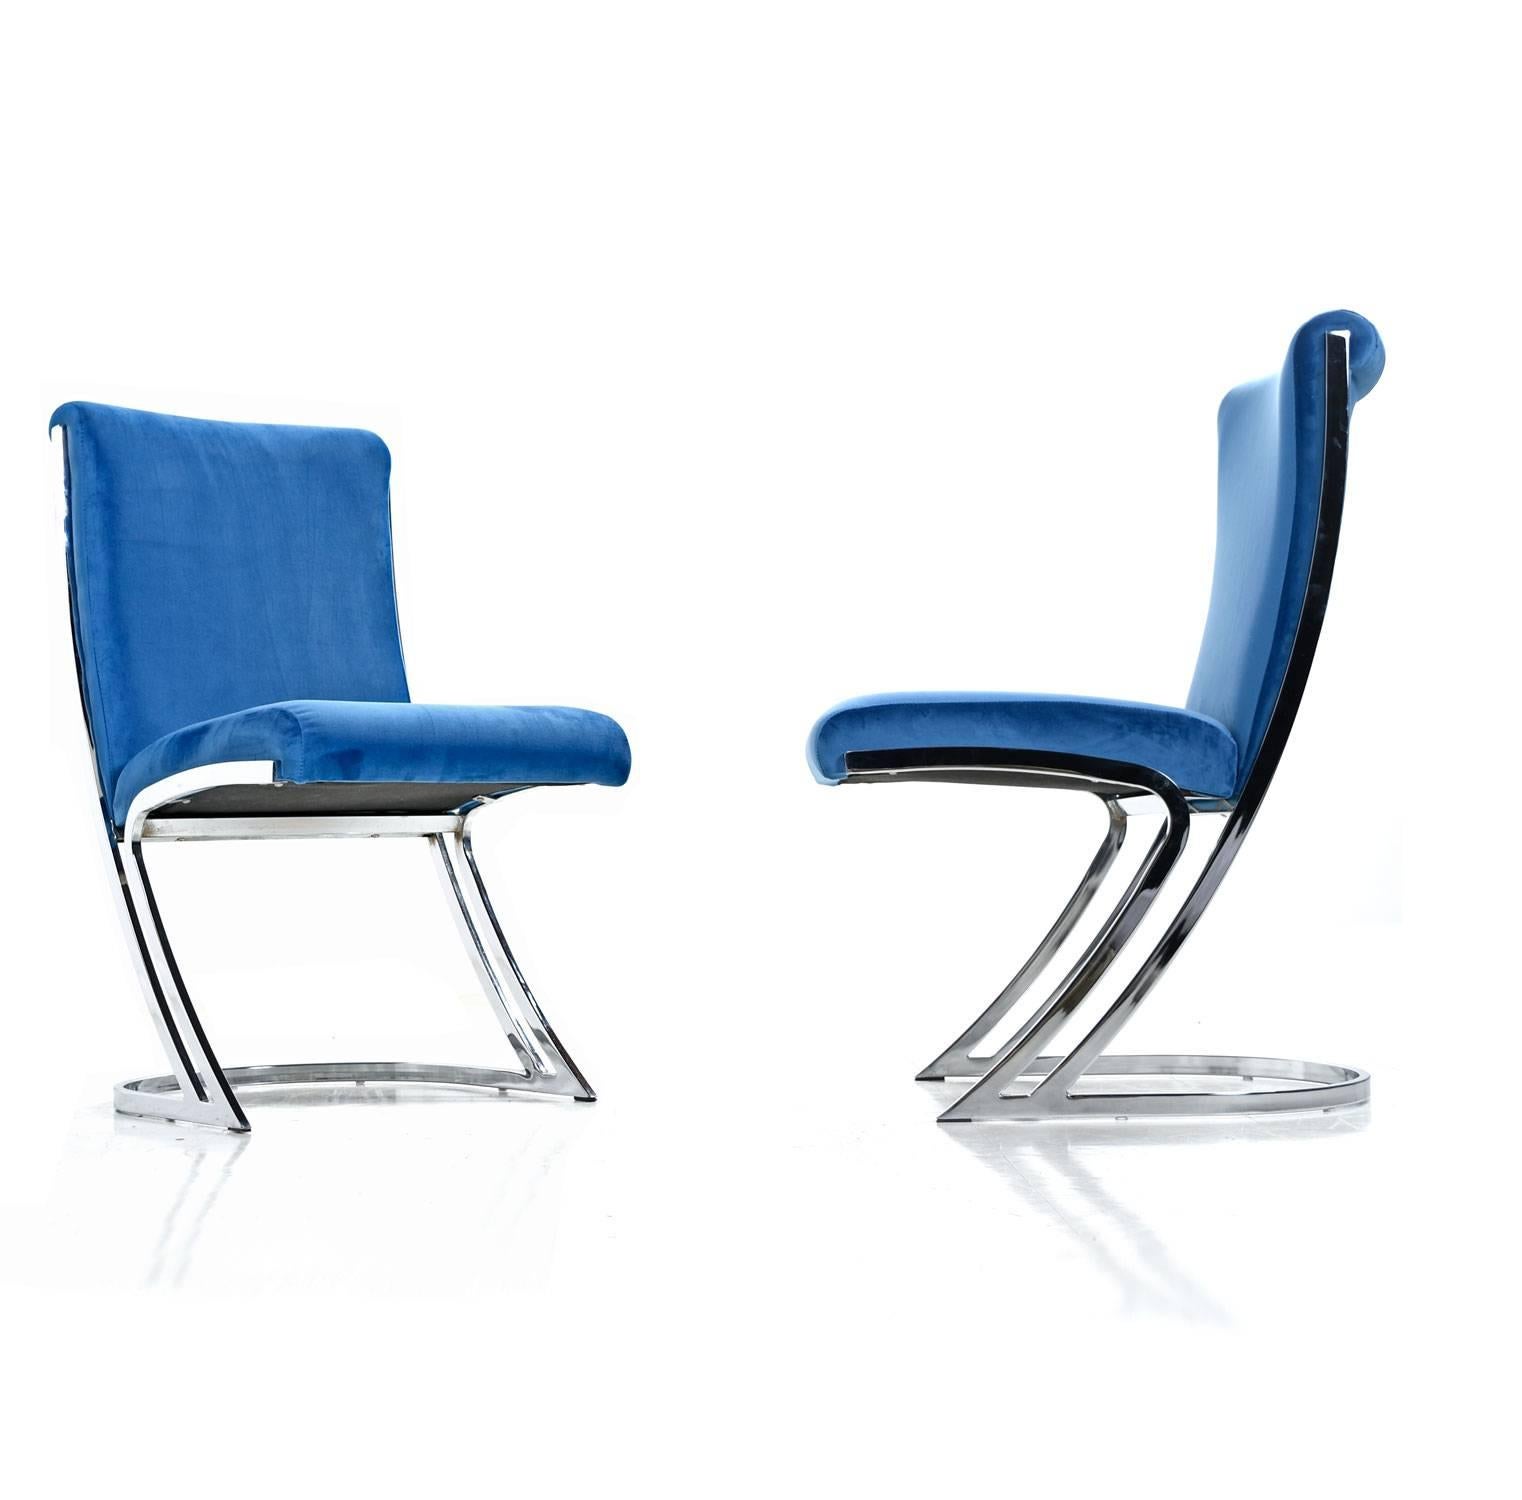 These exquisite chairs designed by Pierre Cardin scream sexy, and sleek with their dynamic angular 